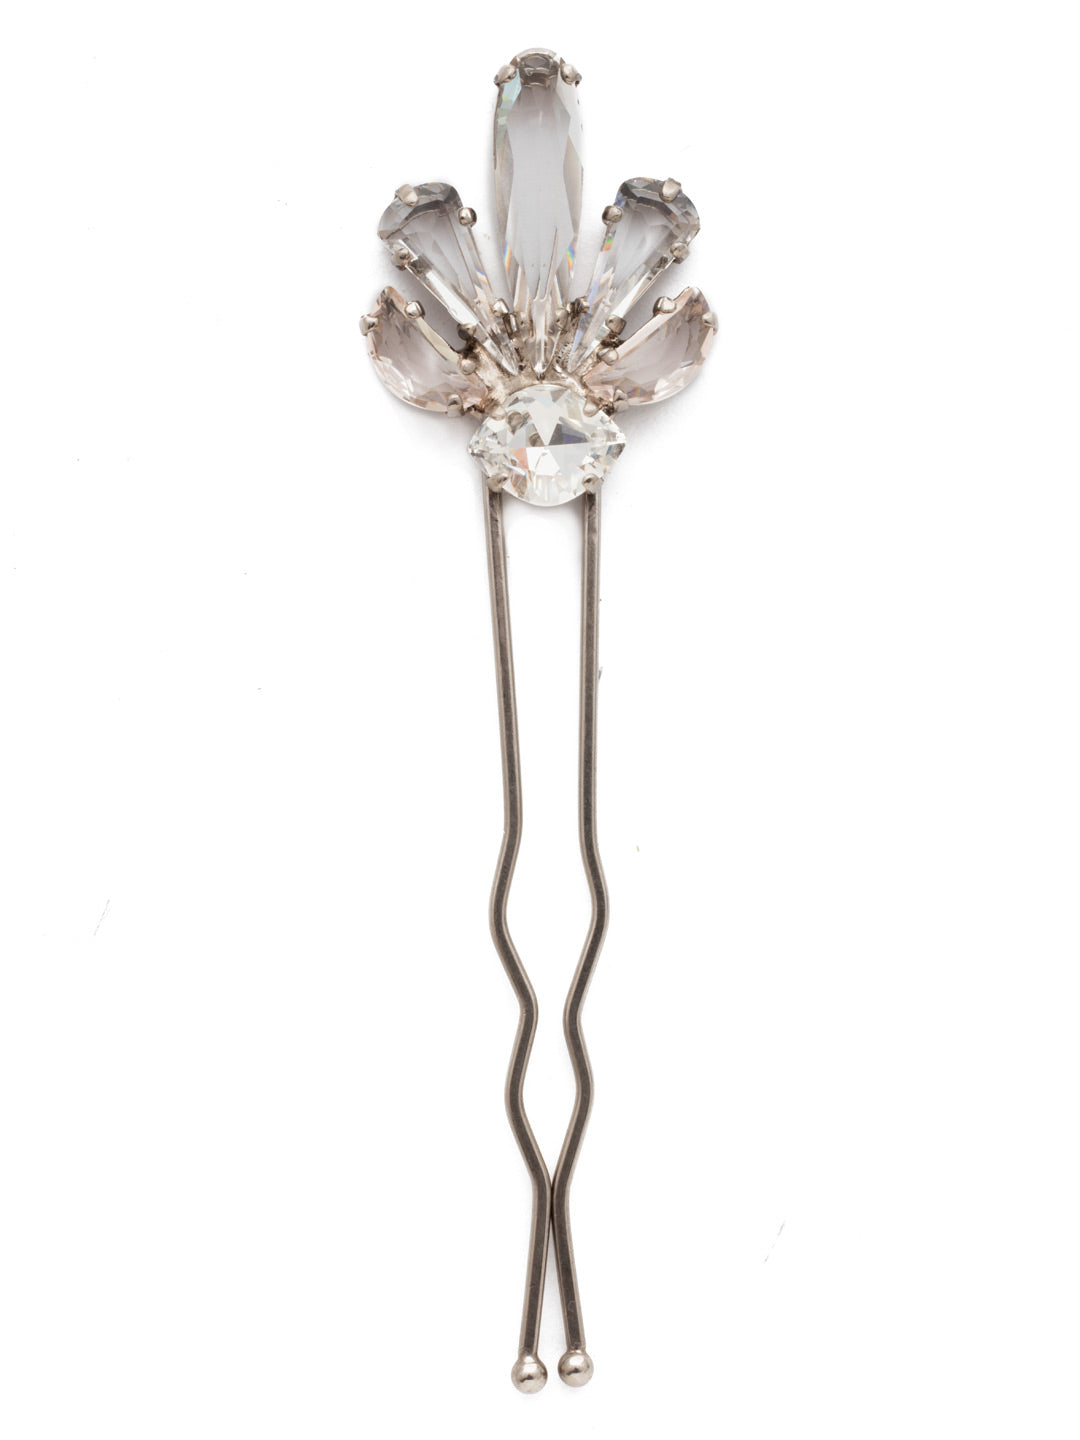 Adalee Hair Pin - HCZ58ASPLS - <p>The Adalee hair pin is simple and sleek, adorned with one small jewel surrounded by a fan of varying lengths of oval crystals. It's the perfect touch of something extra. From Sorrelli's Soft Petal collection in our Antique Silver-tone finish.</p>